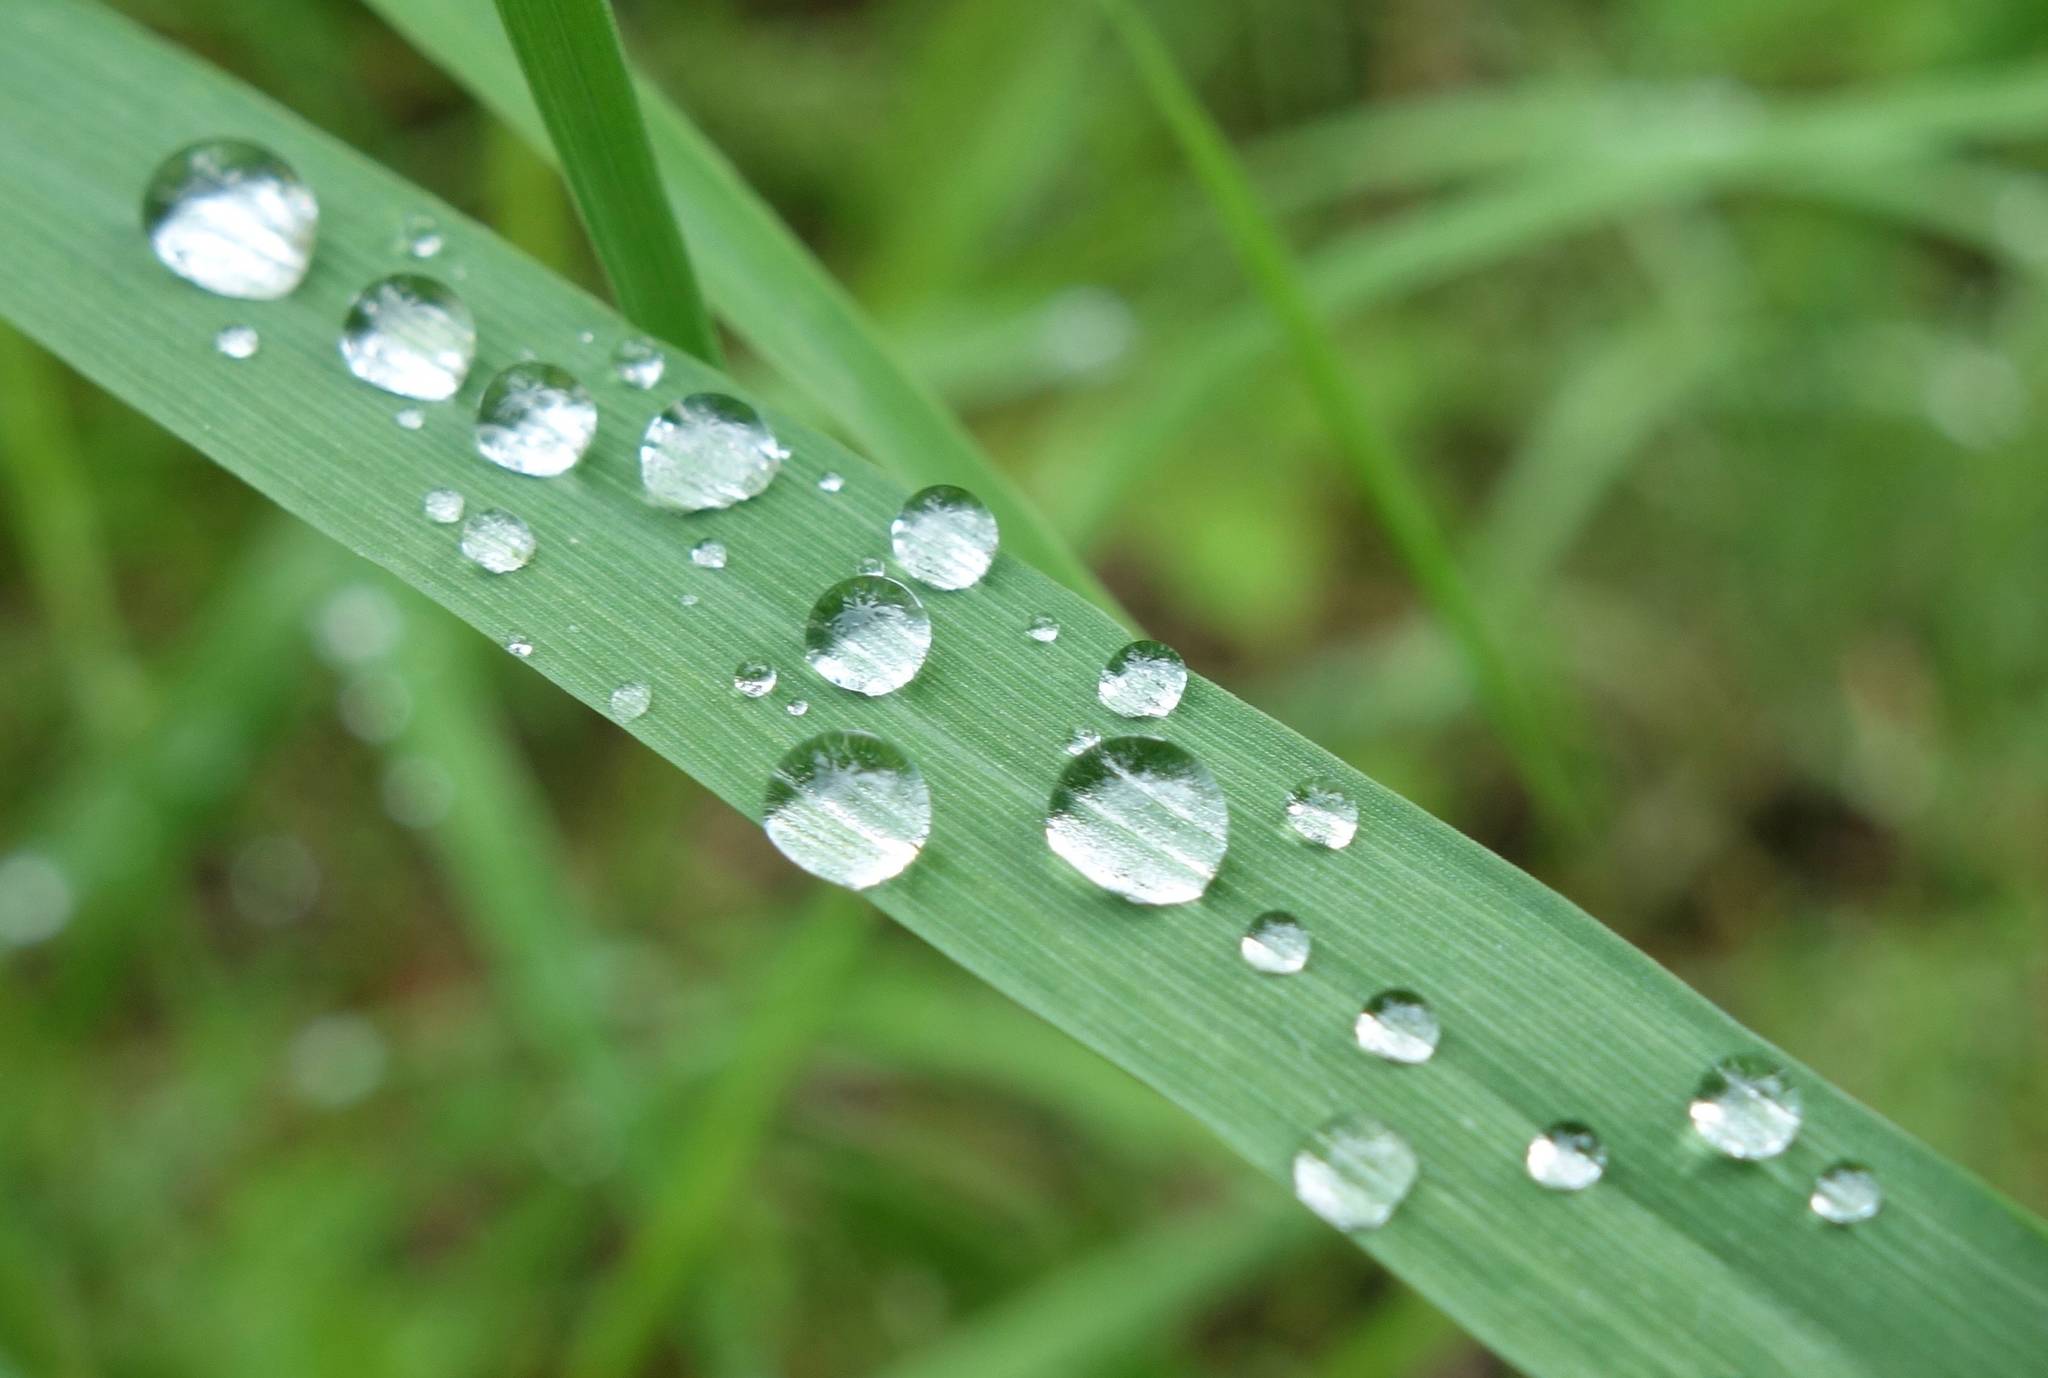 Water droplets sit on a blade of grass following a rainy period in Interior Alaska. (Courtesy Photo | Ned Rozell)